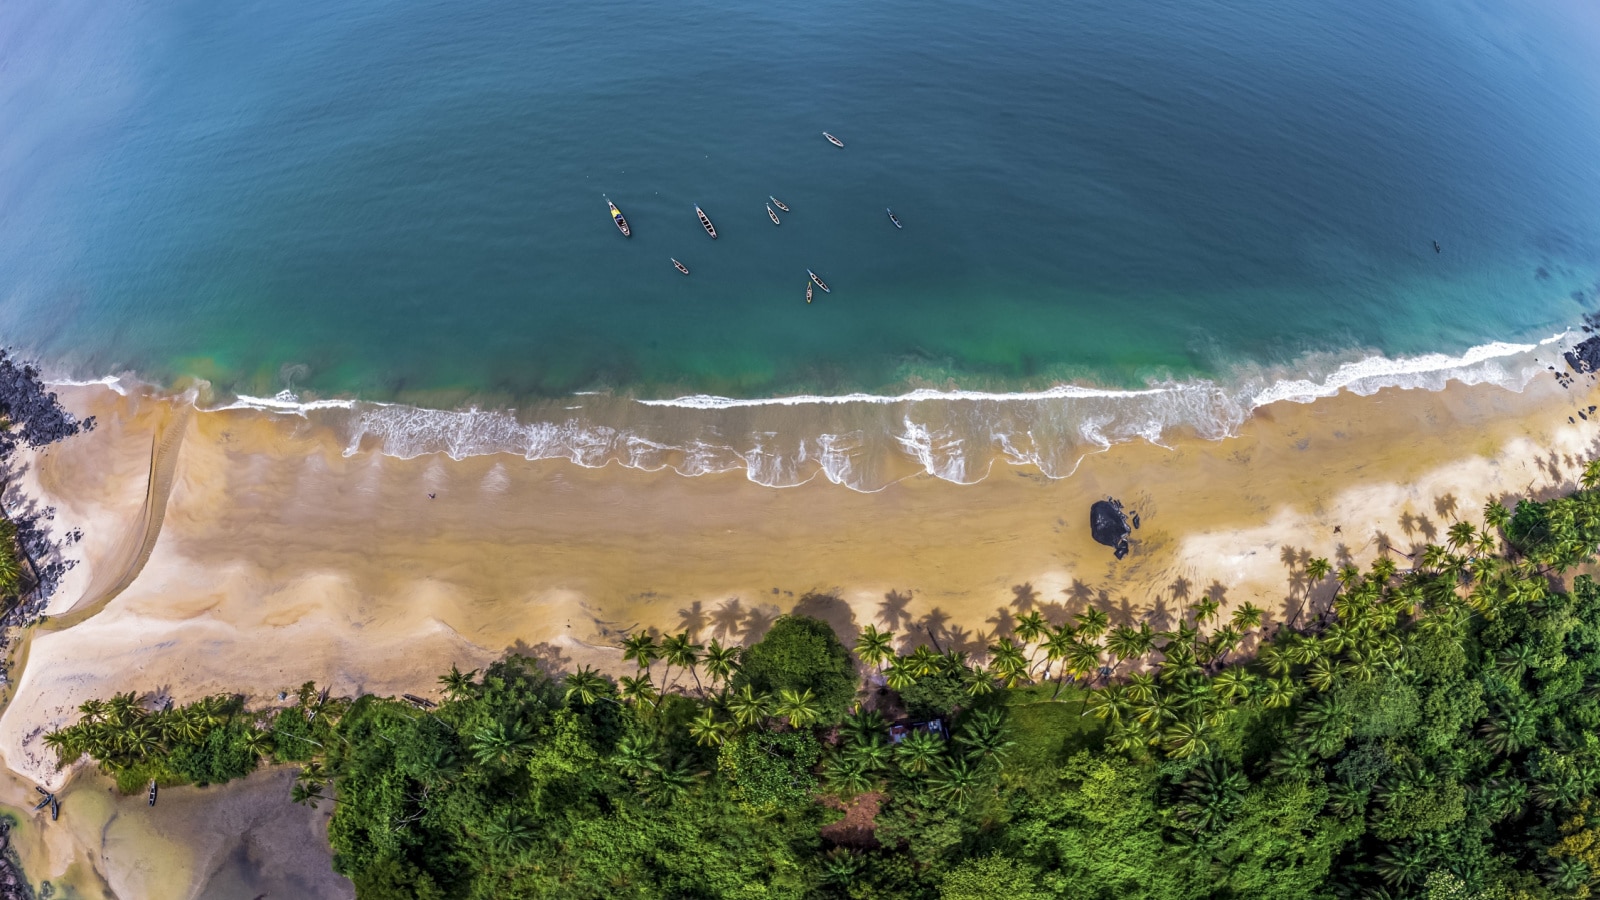 This is one of the most beautiful beach in Sierra Leone Its called Bureh beach